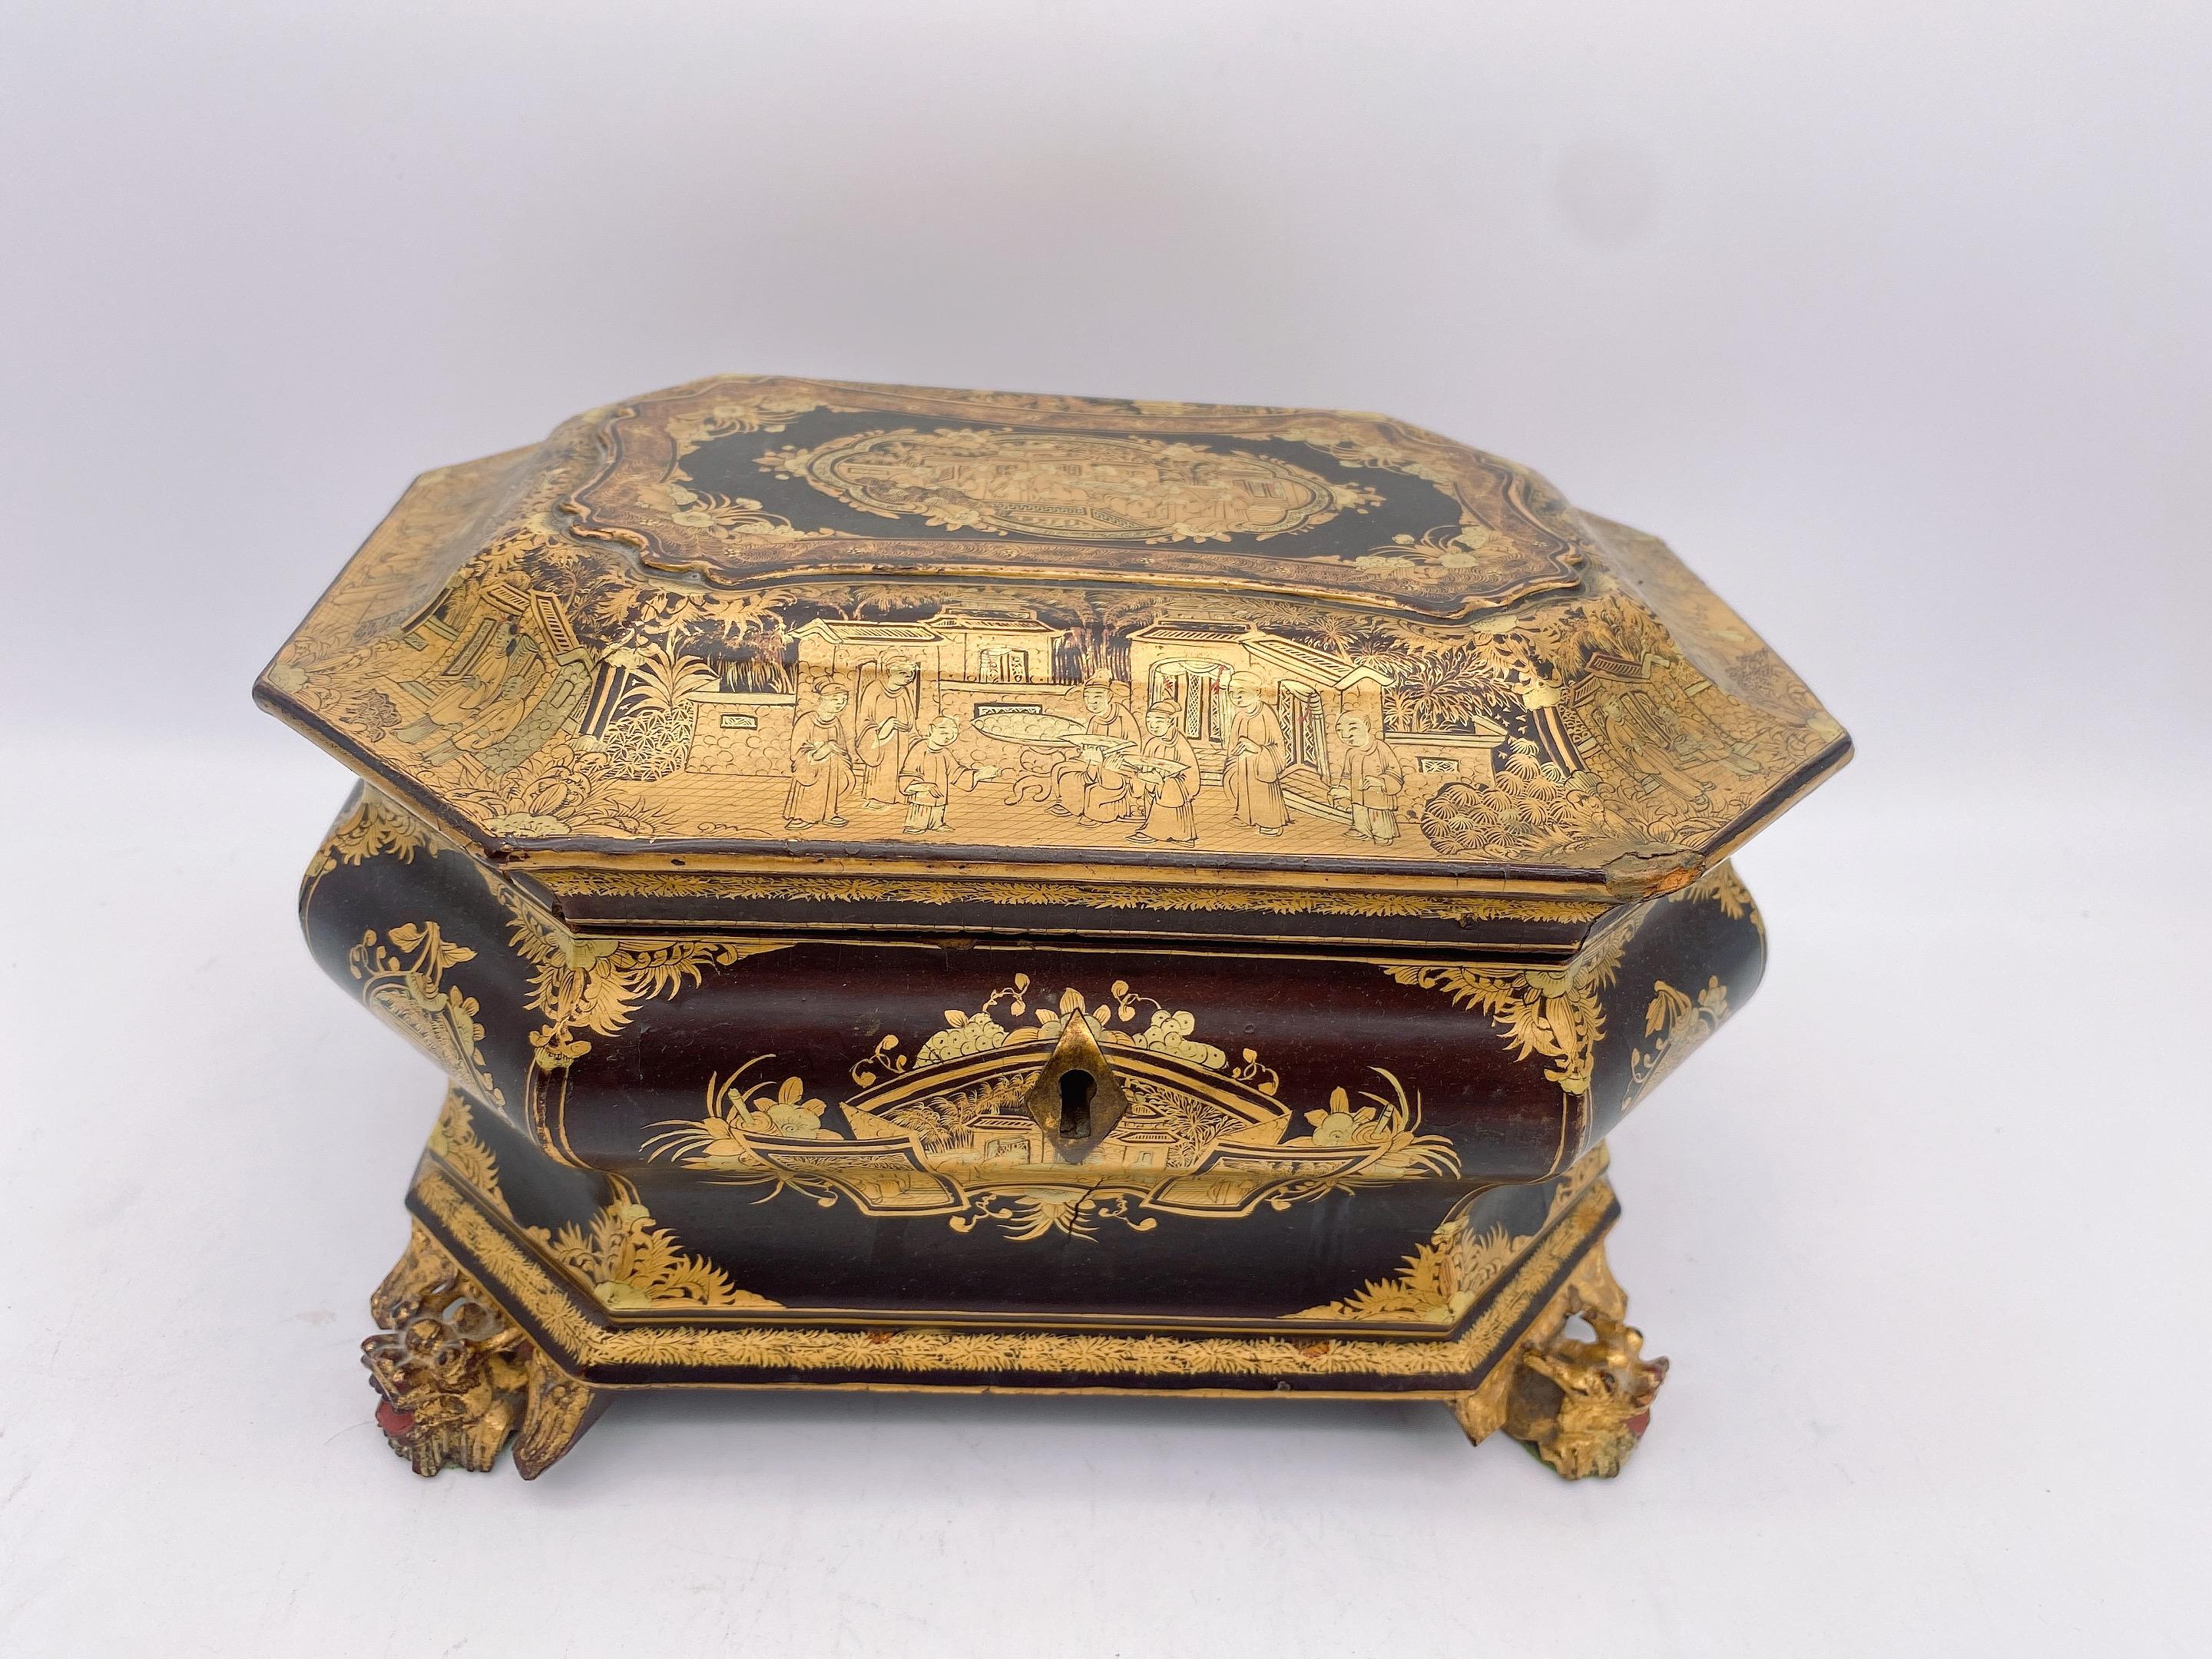 19th Century golden black lacquer Chinese tea caddy with two pewters with 4 foots, the gilt body decorated with panels of landscapes, two pewters with covers, it is very beautiful small piece. good condition, See more pictures, measures: 8.5